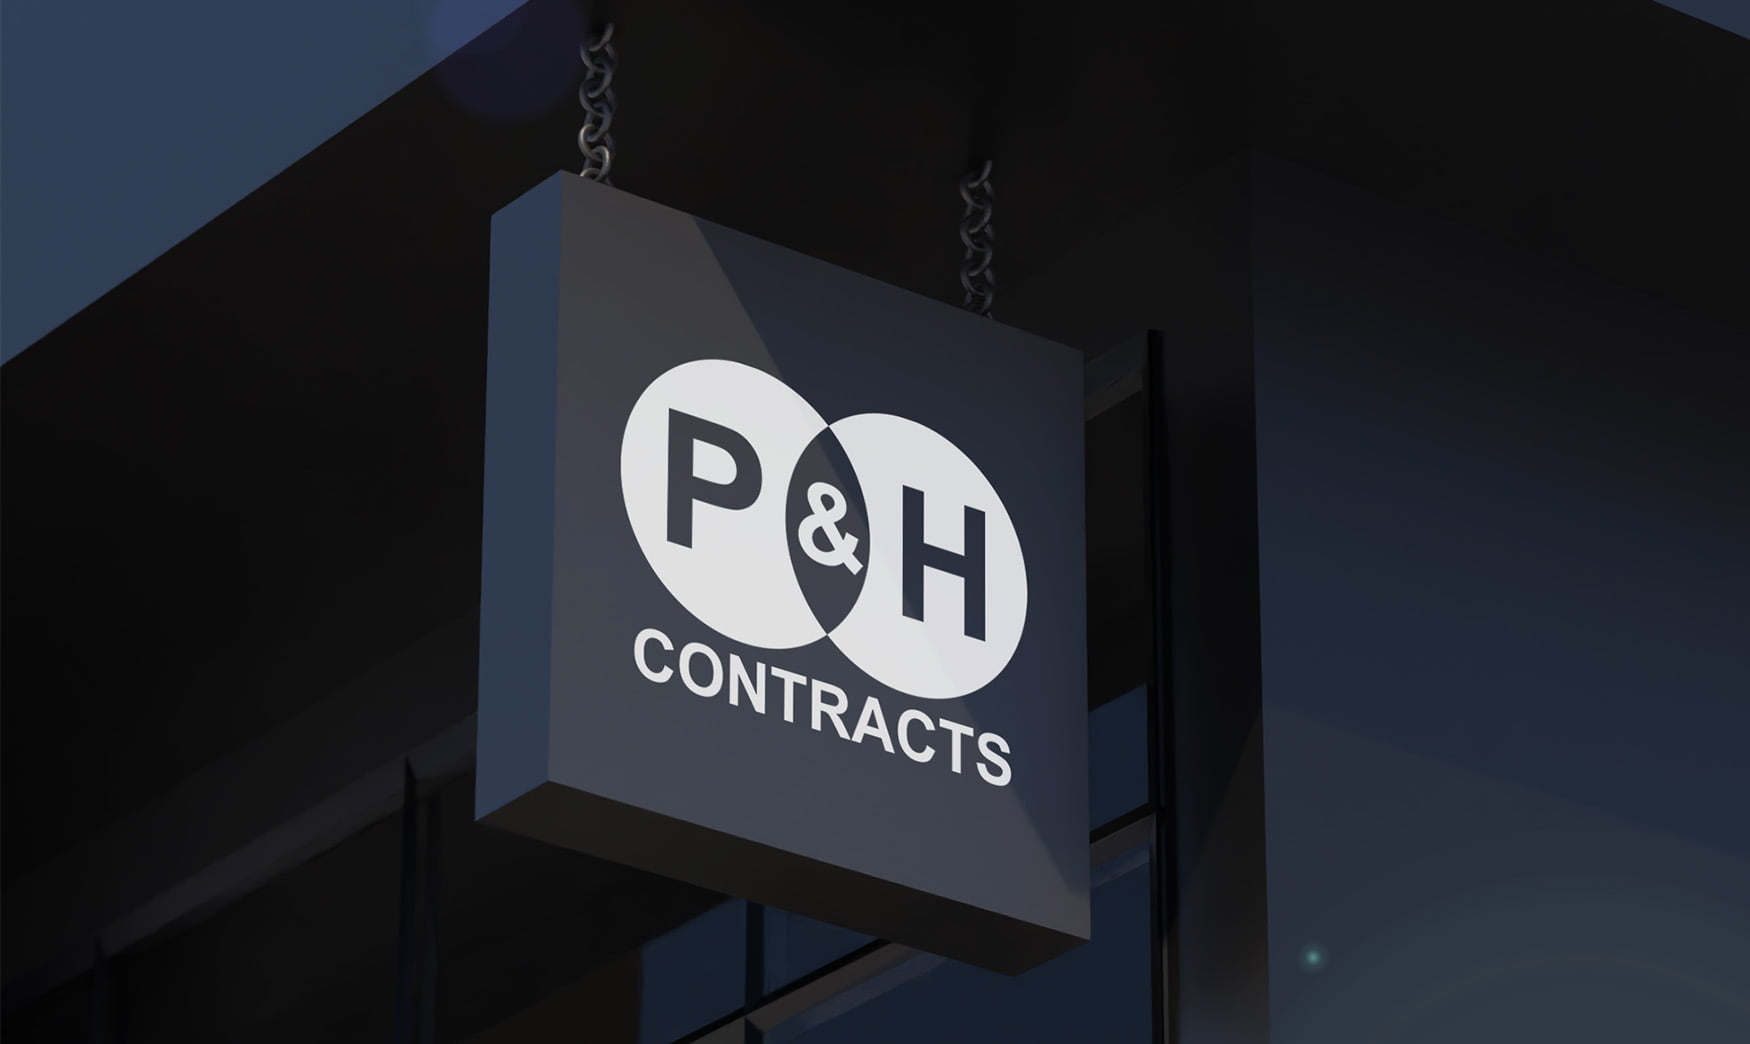 P&H Contracts Business Branding for Tradesmen